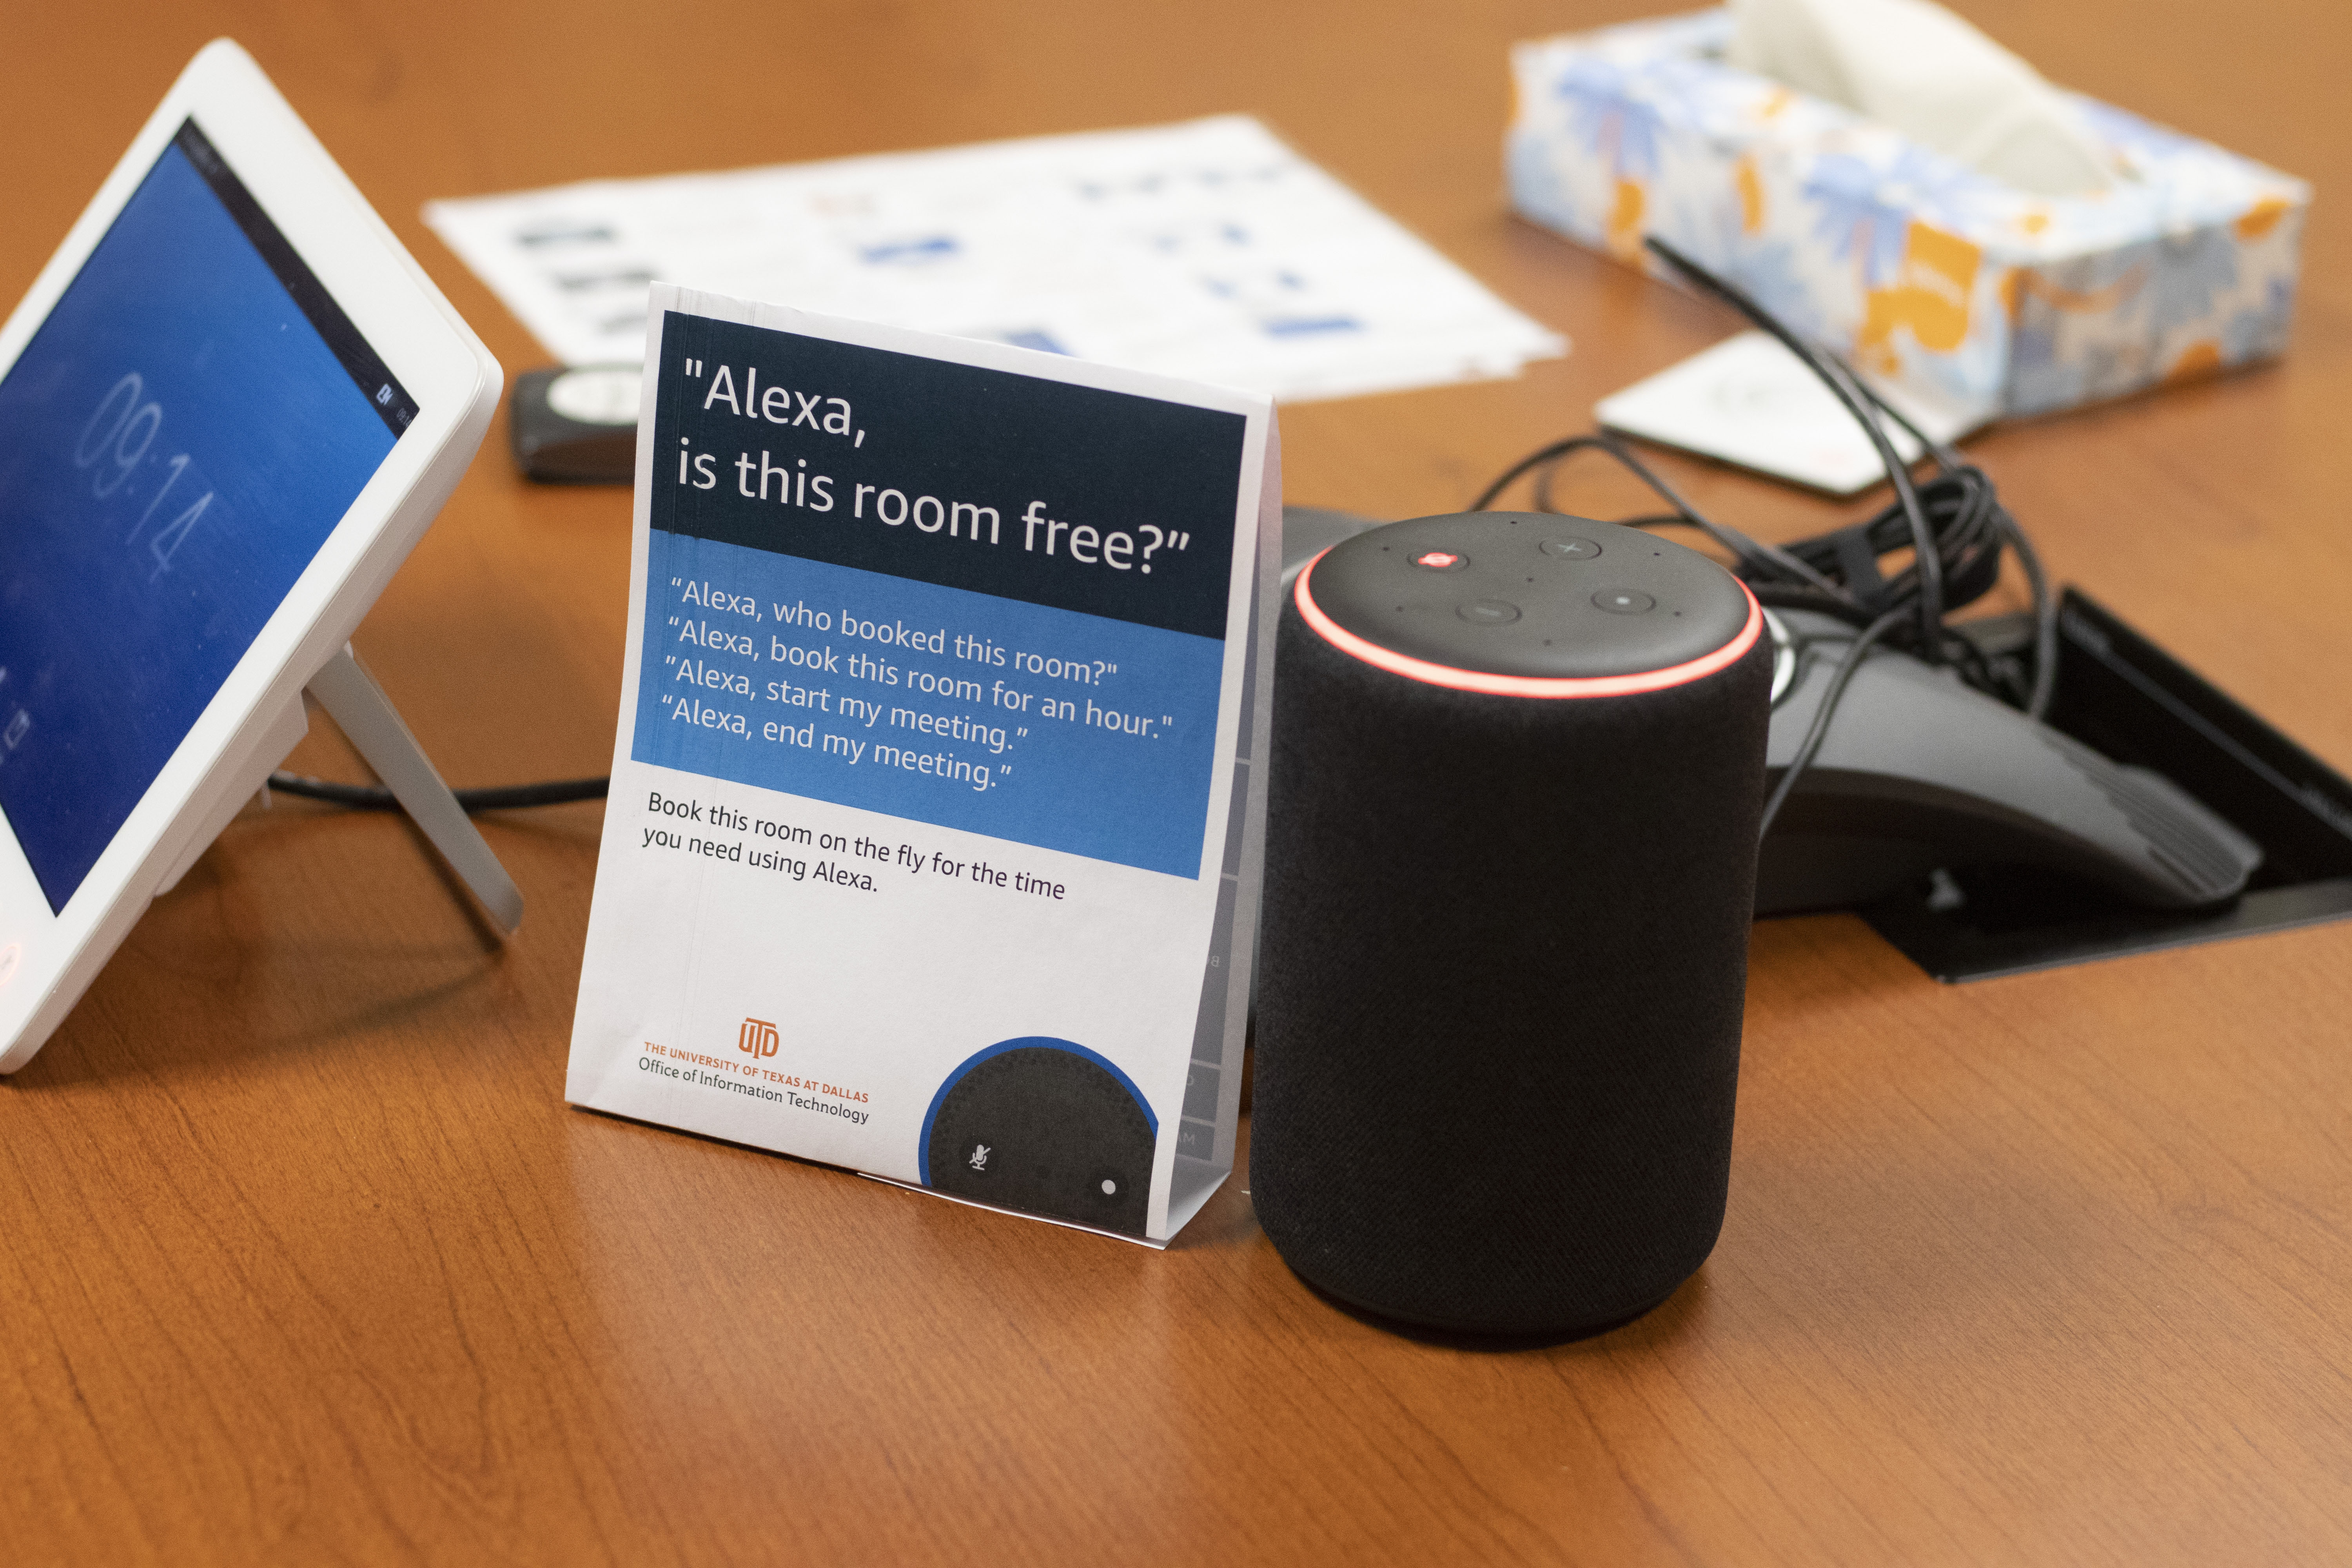 Amazon Echos to be installed in dorms